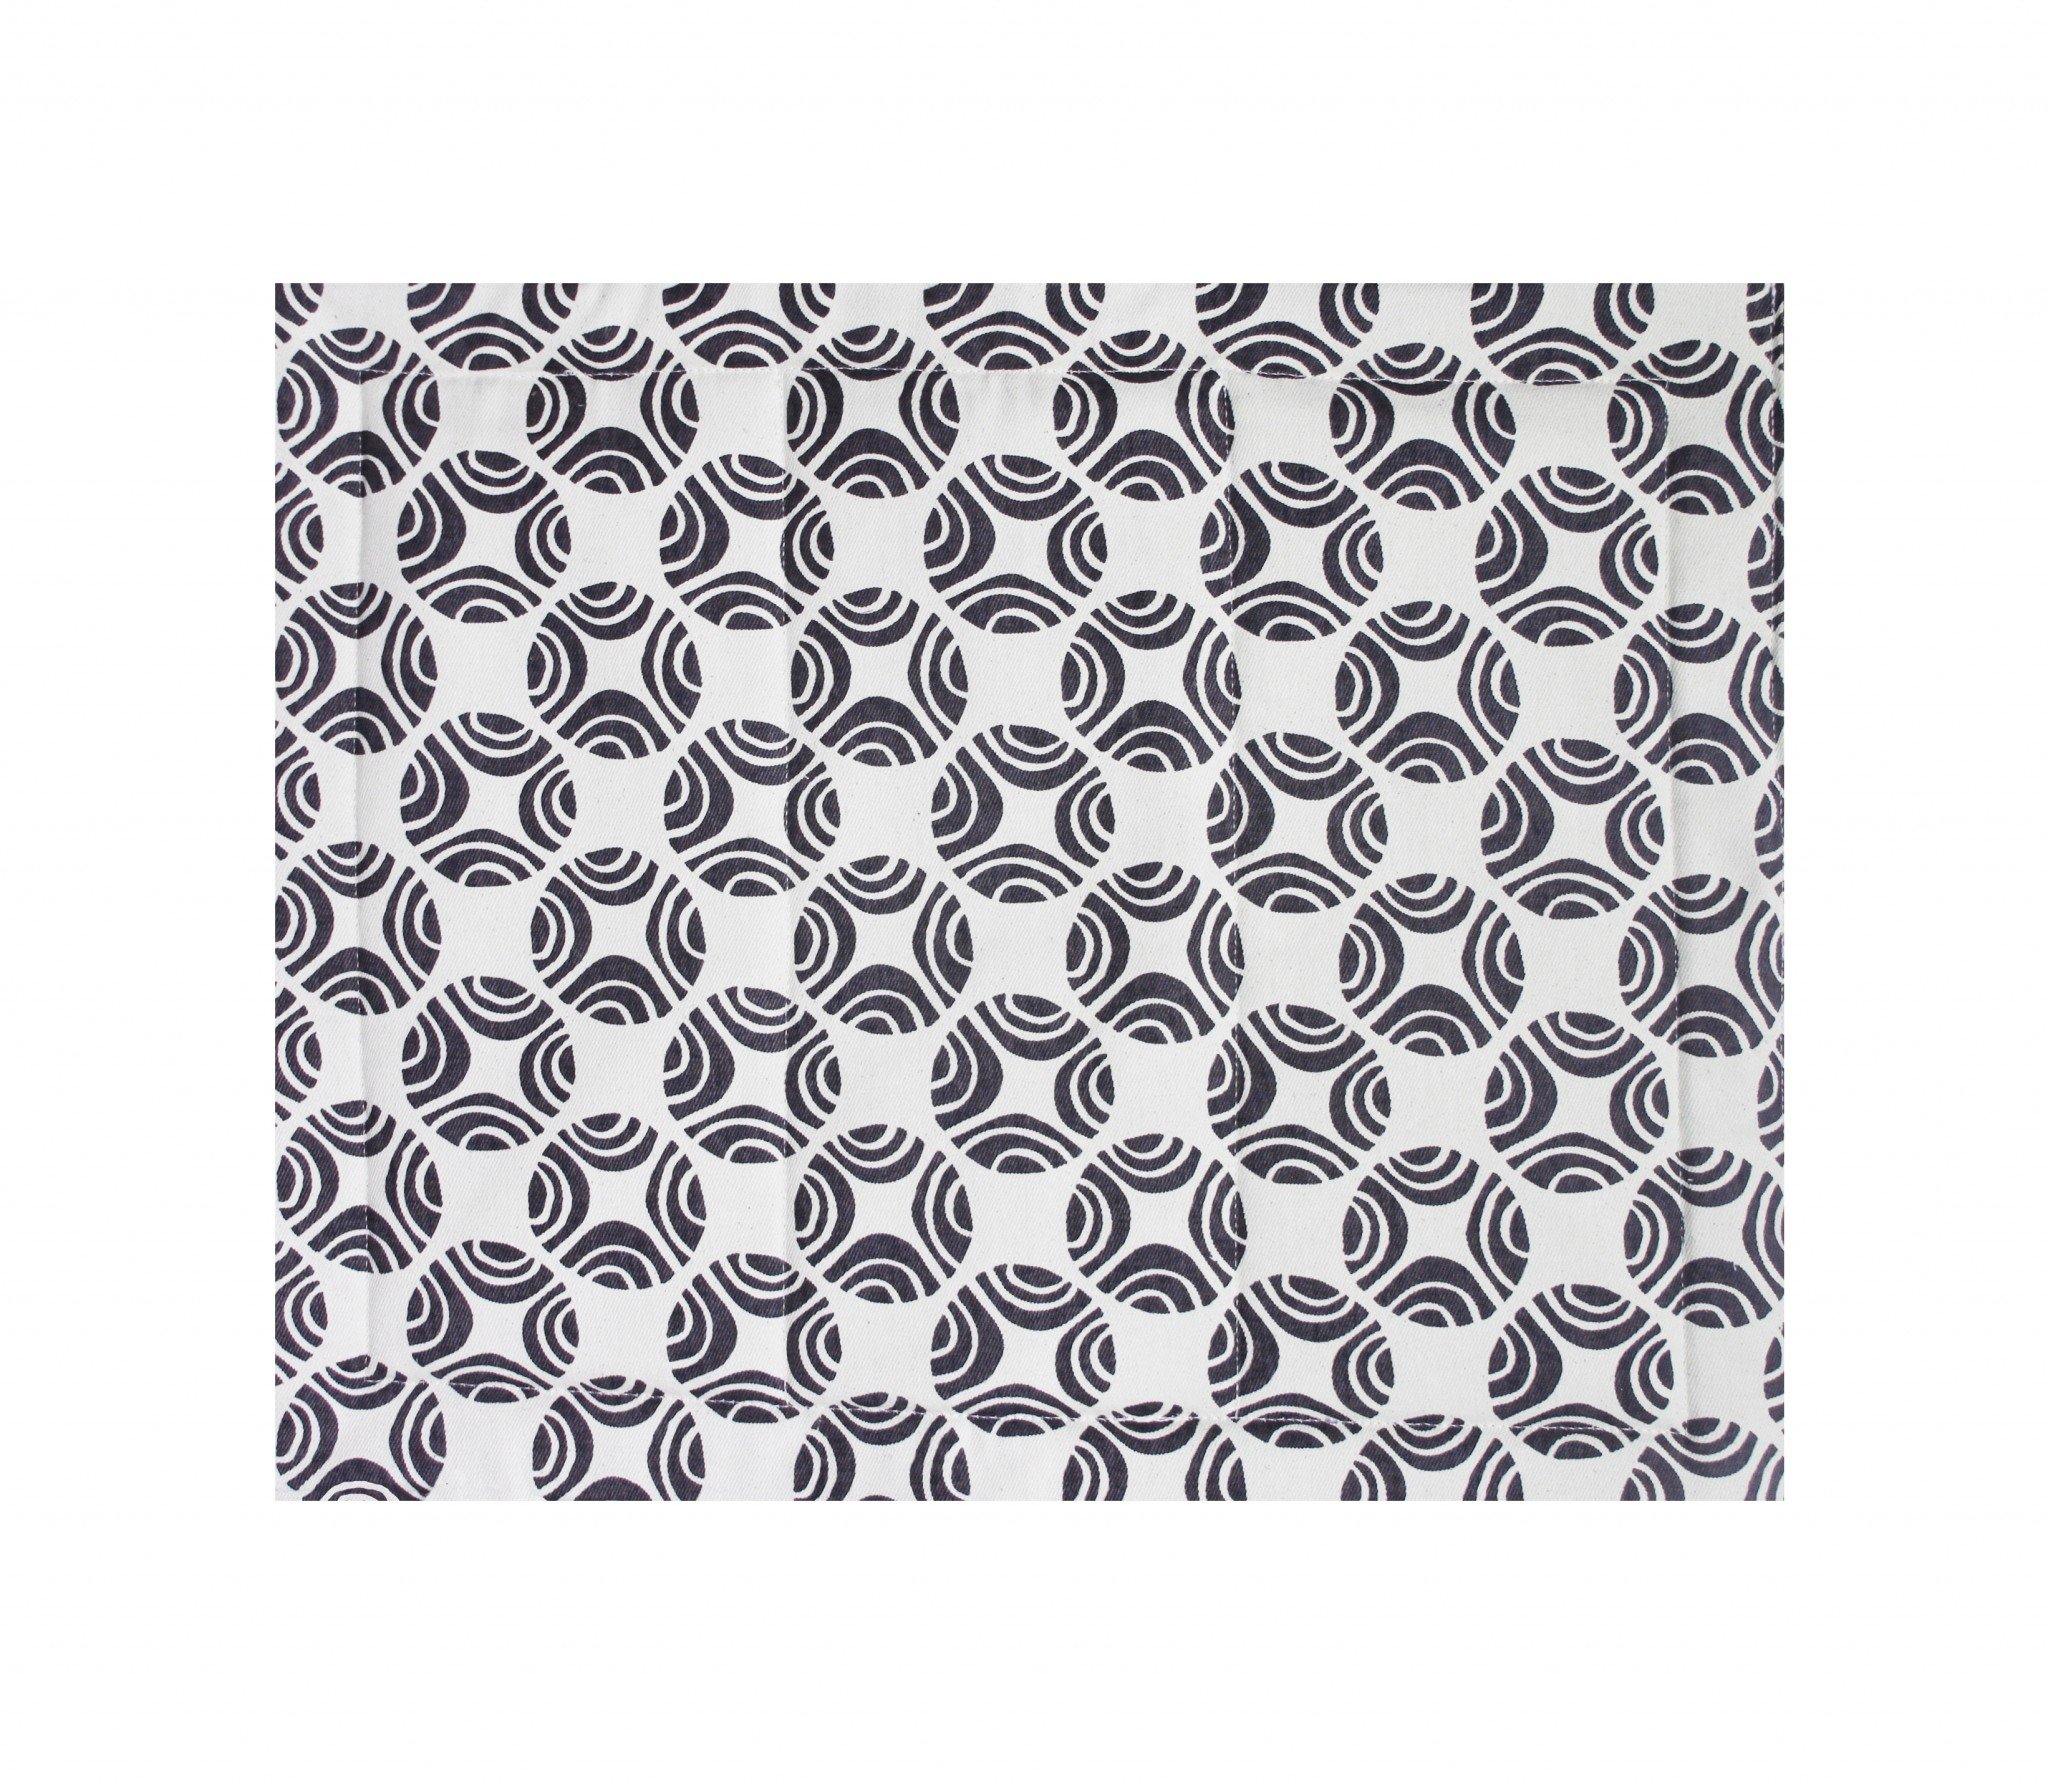 organic cotton fabric close up black and white picasso pattern